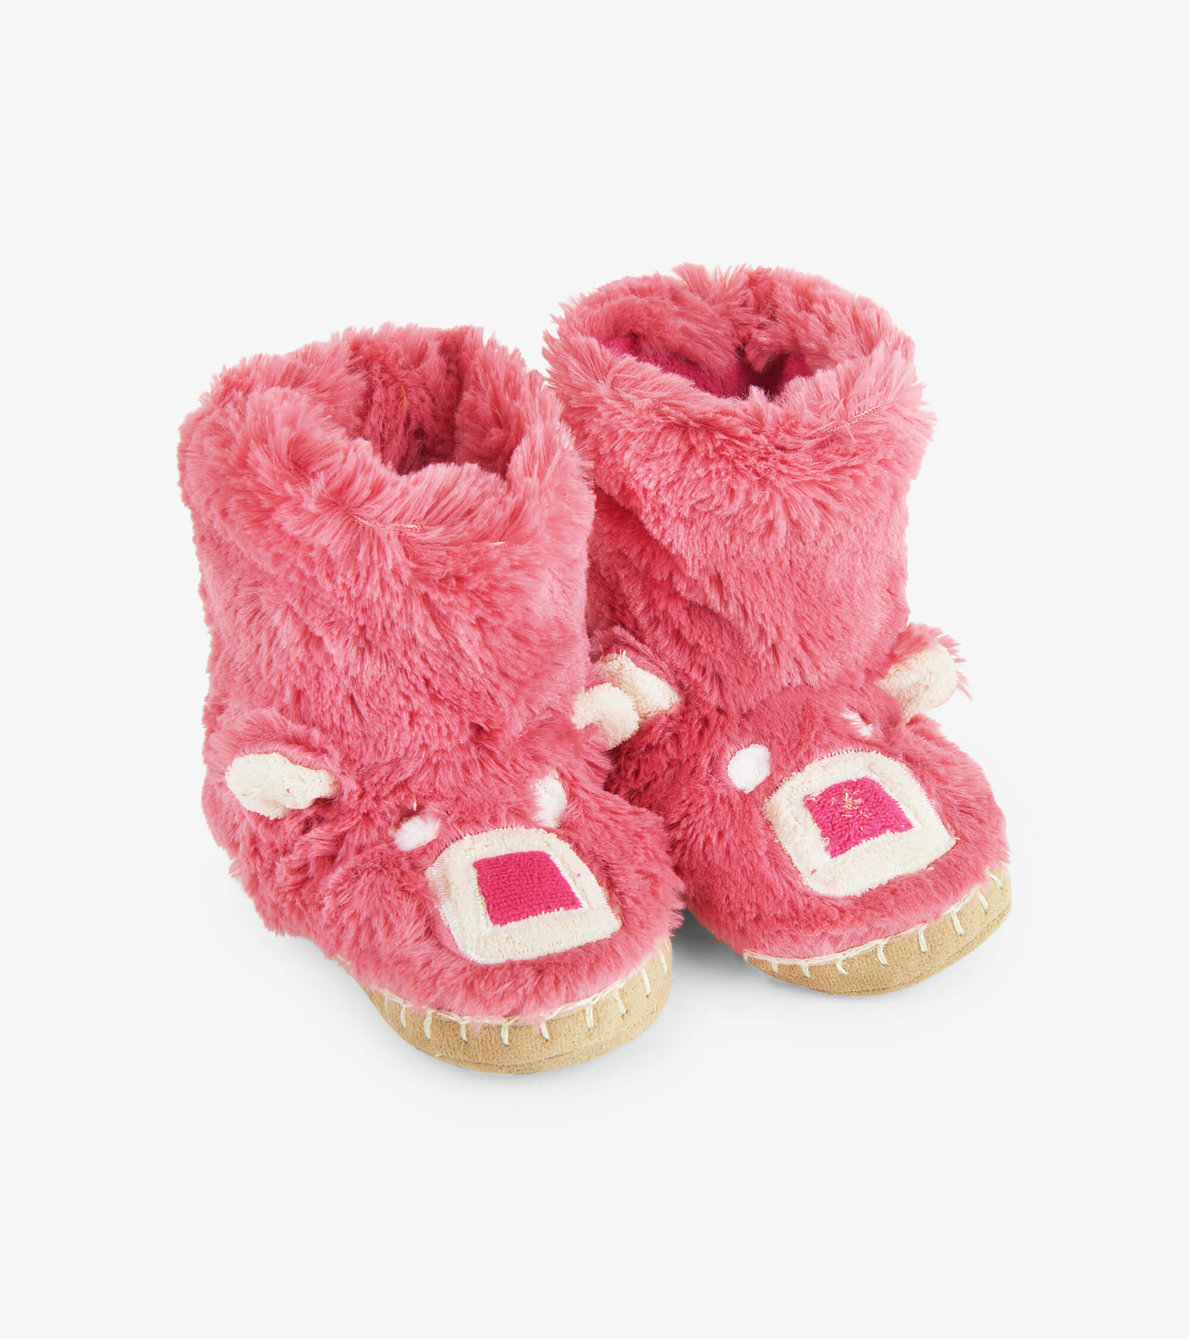 View larger image of Pink Bear Kids Fuzzy Slouch Slippers